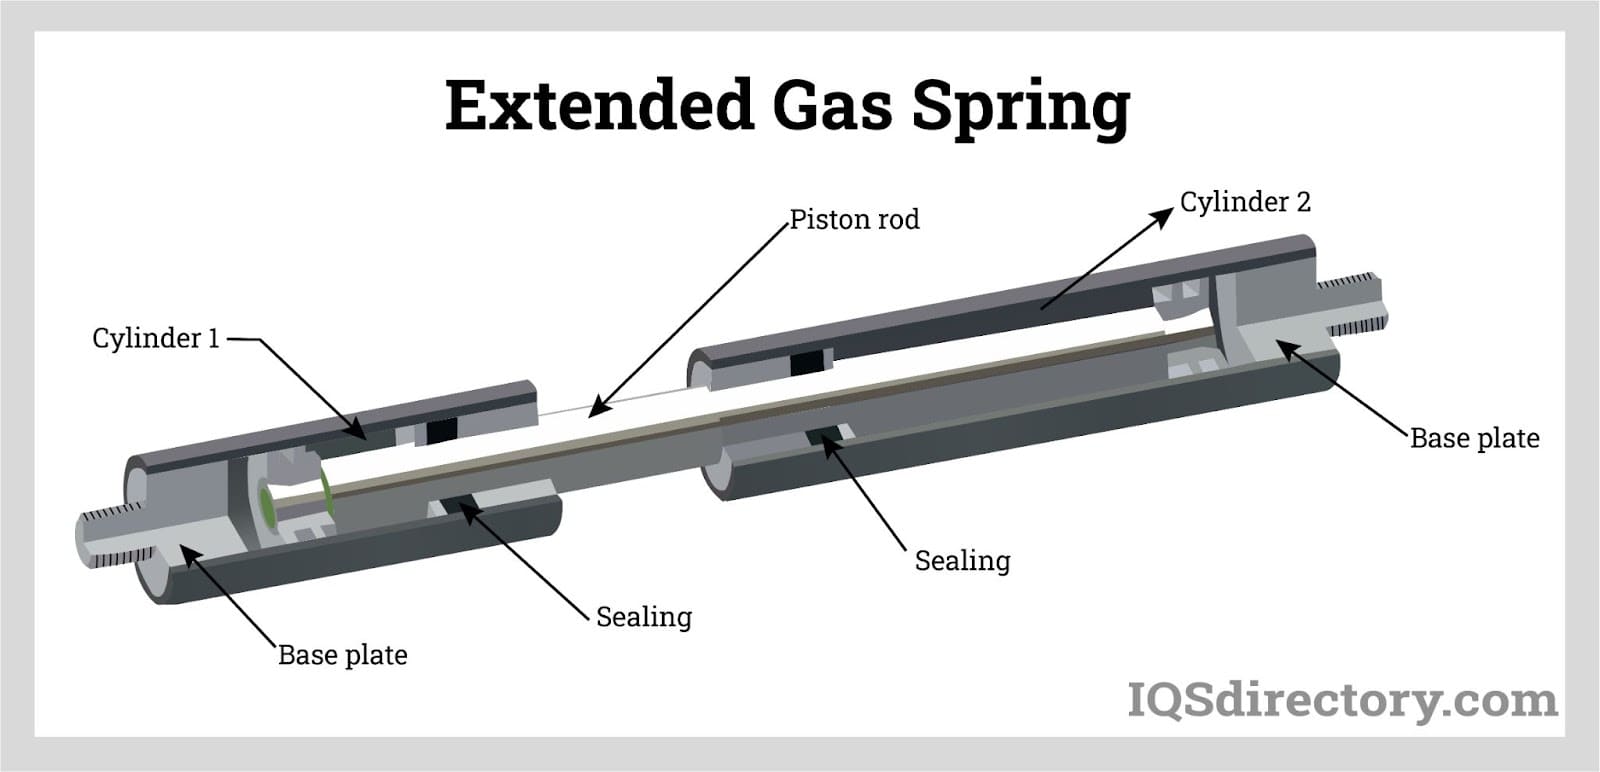 Automotive Gas Springs - Gas Spring For Automobile Applications 